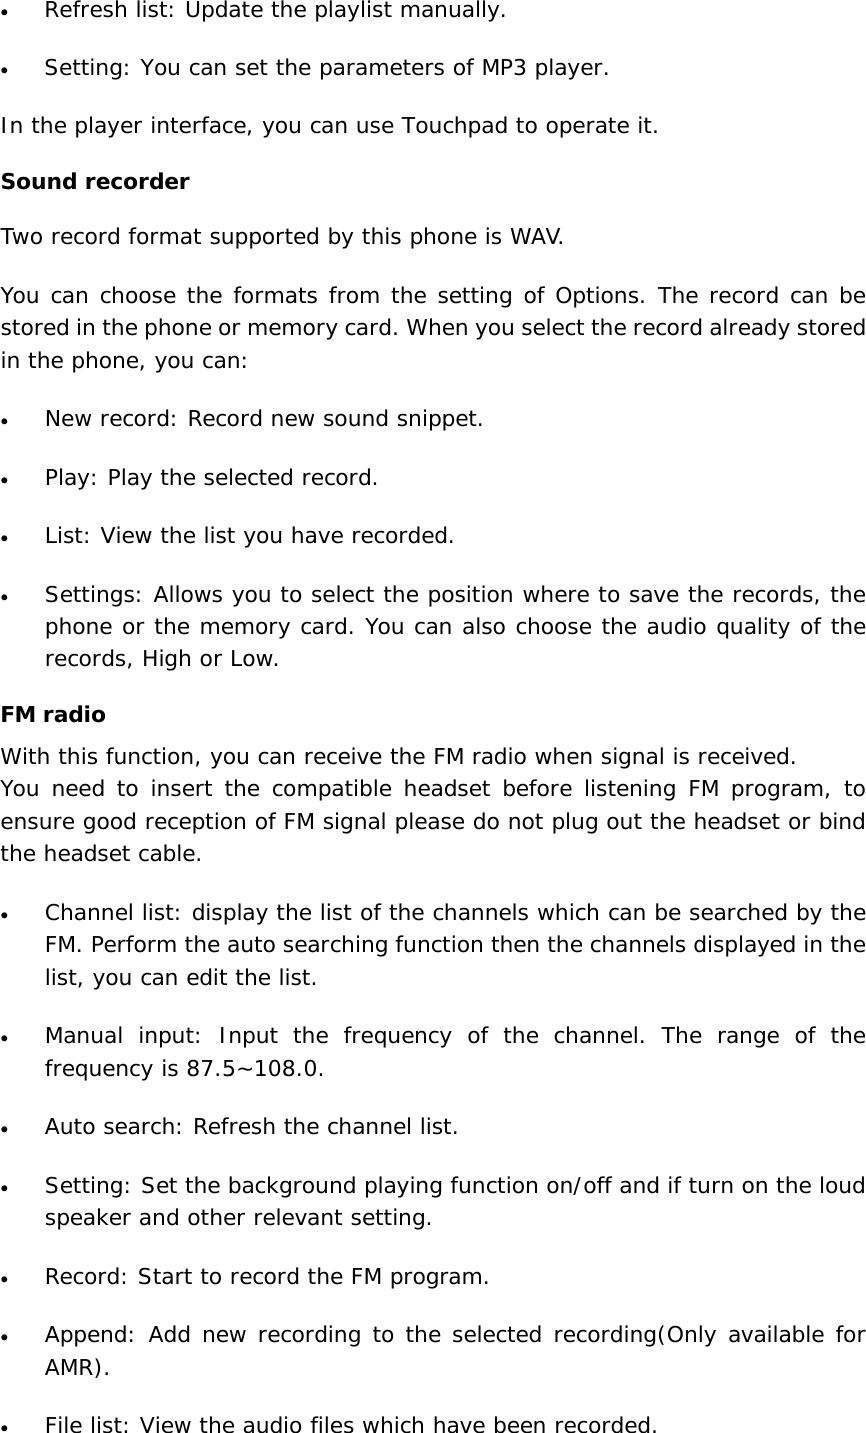 • Refresh list: Update the playlist manually. • Setting: You can set the parameters of MP3 player. In the player interface, you can use Touchpad to operate it.  Sound recorder Two record format supported by this phone is WAV. You can choose the formats from the setting of Options. The record can be stored in the phone or memory card. When you select the record already stored in the phone, you can: • New record: Record new sound snippet. • Play: Play the selected record. • List: View the list you have recorded. • Settings: Allows you to select the position where to save the records, the phone or the memory card. You can also choose the audio quality of the records, High or Low. FM radio With this function, you can receive the FM radio when signal is received. You need to insert the compatible headset before listening FM program, to ensure good reception of FM signal please do not plug out the headset or bind the headset cable.  • Channel list: display the list of the channels which can be searched by the FM. Perform the auto searching function then the channels displayed in the list, you can edit the list. • Manual input: Input the frequency of the channel. The range of the frequency is 87.5~108.0. • Auto search: Refresh the channel list. • Setting: Set the background playing function on/off and if turn on the loud speaker and other relevant setting. • Record: Start to record the FM program. • Append: Add new recording to the selected recording(Only available for AMR). • File list: View the audio files which have been recorded. 